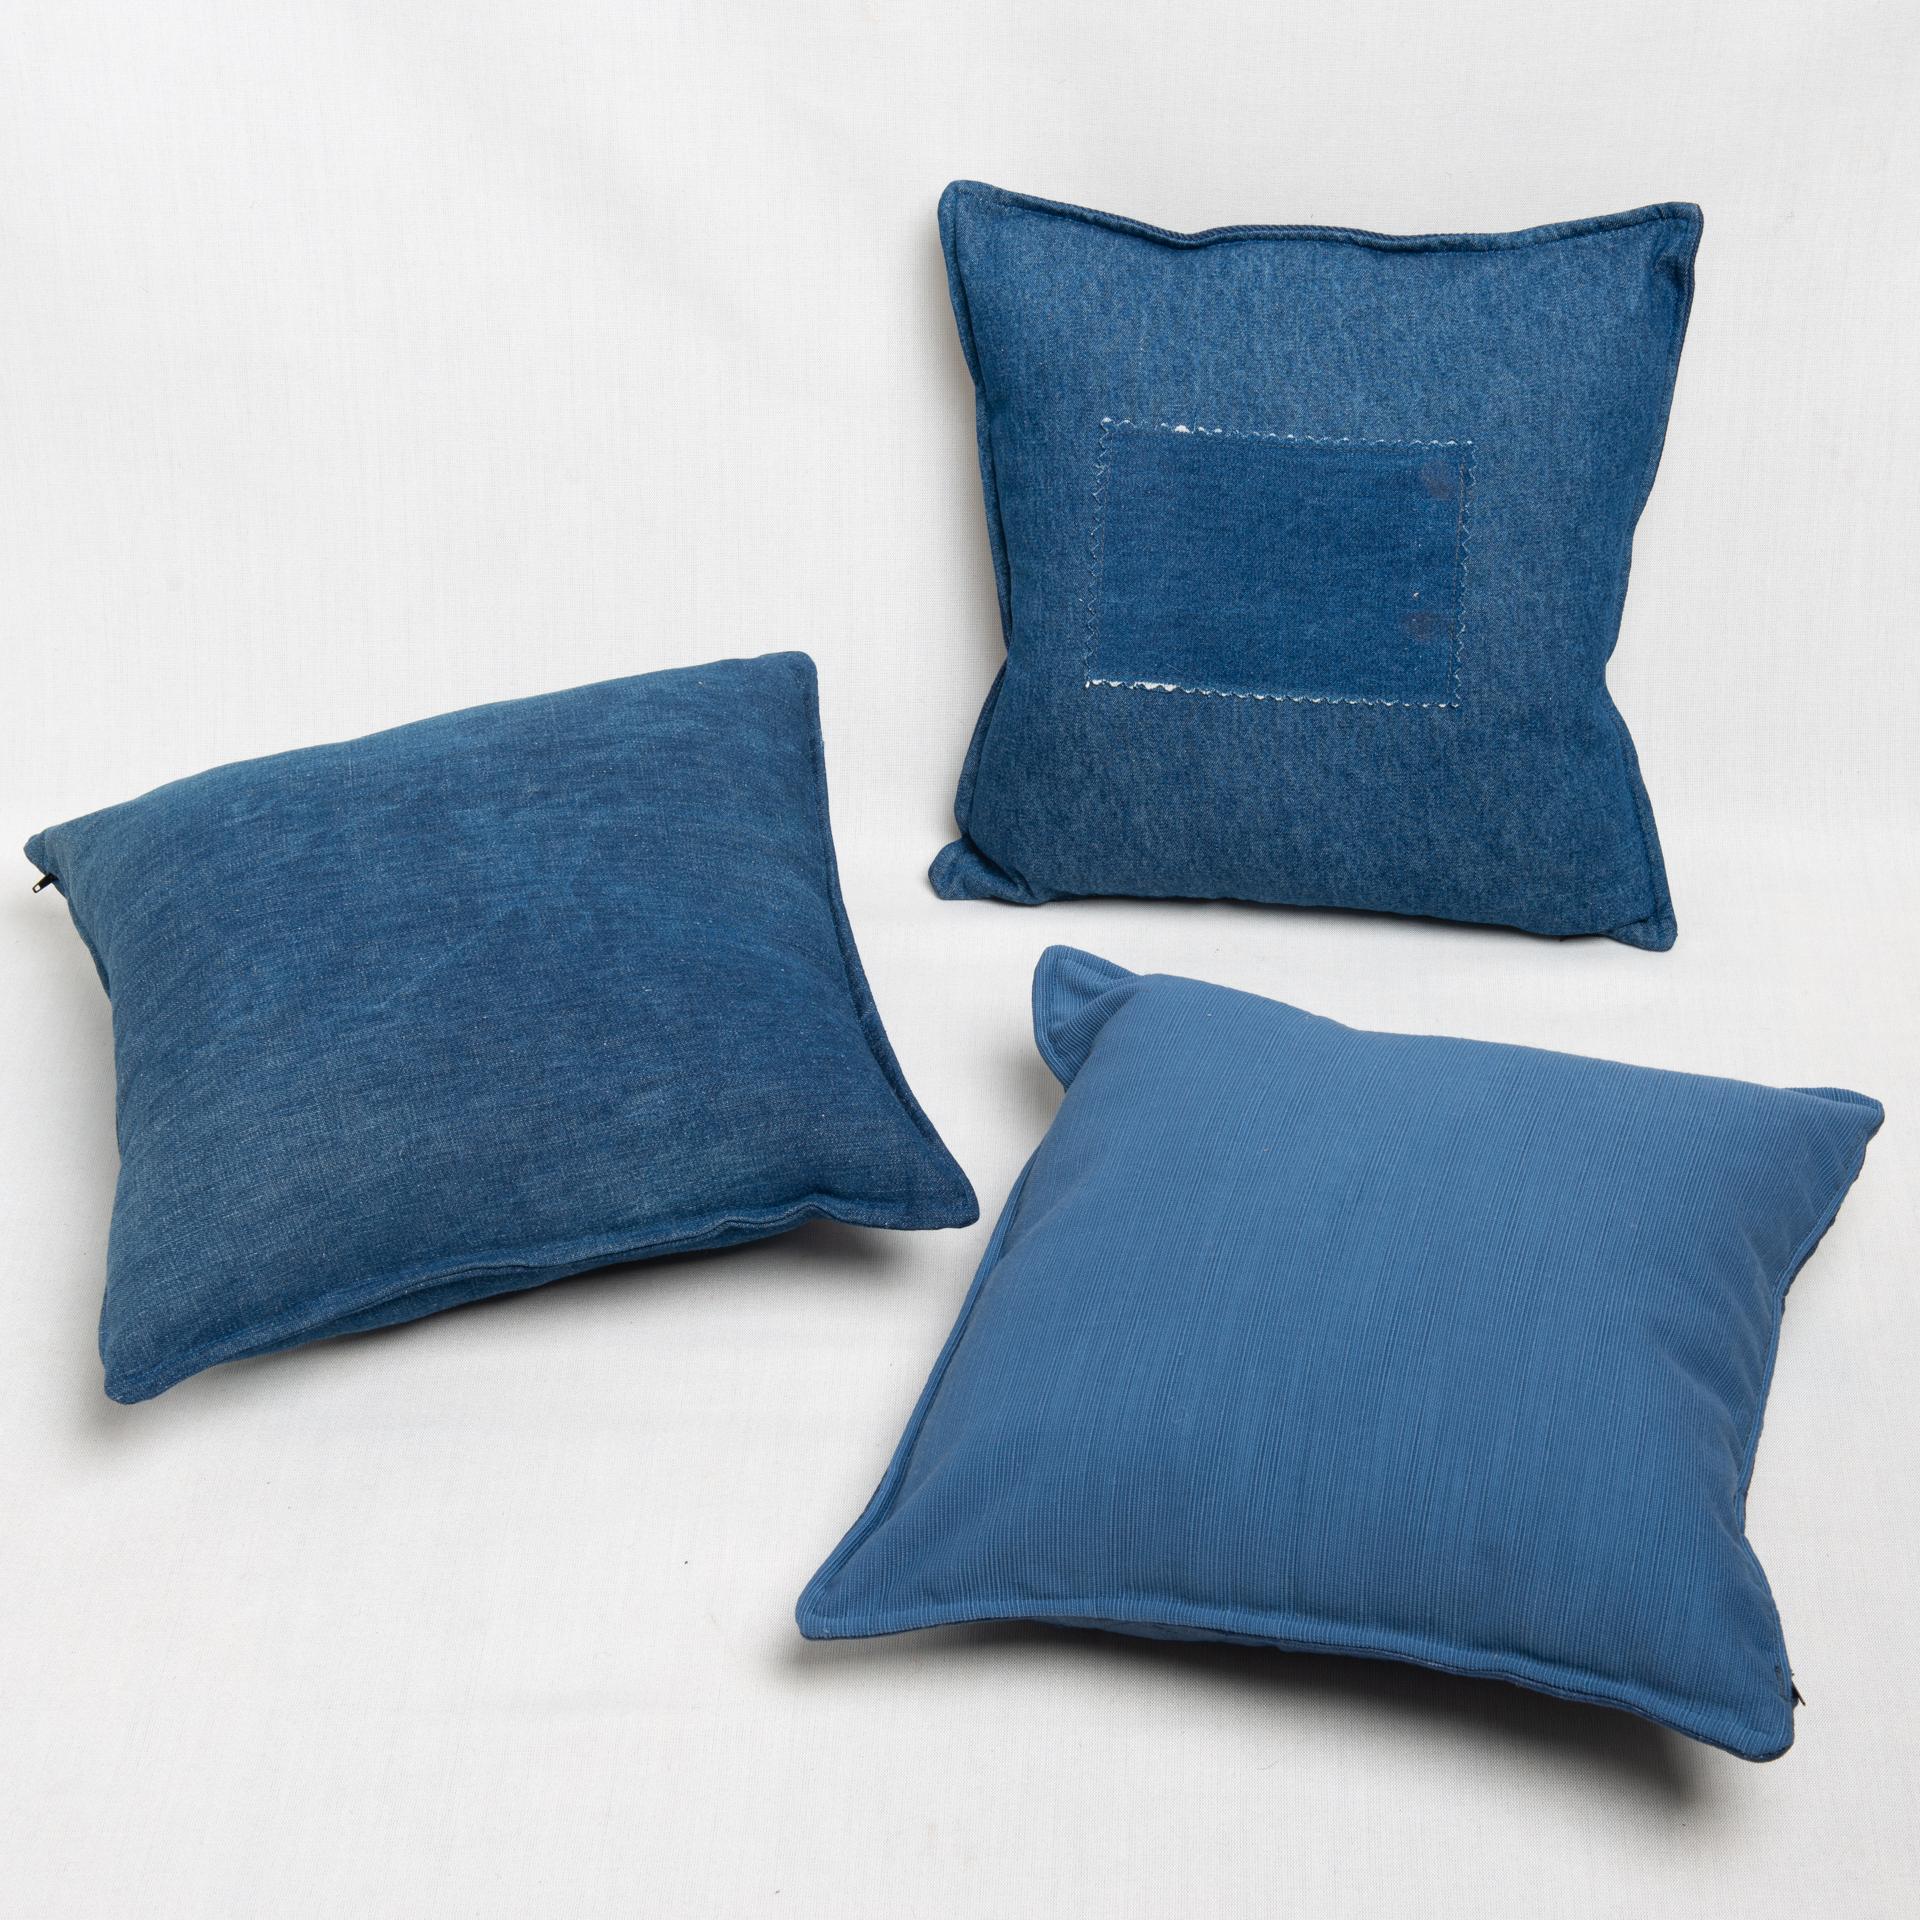 Casual pillows in old denim fabric and topstitched canvas: one with a stitched part, other all in old denim, last with old denim with patch. On both sizes, of course.
Do You like my idea ?.

